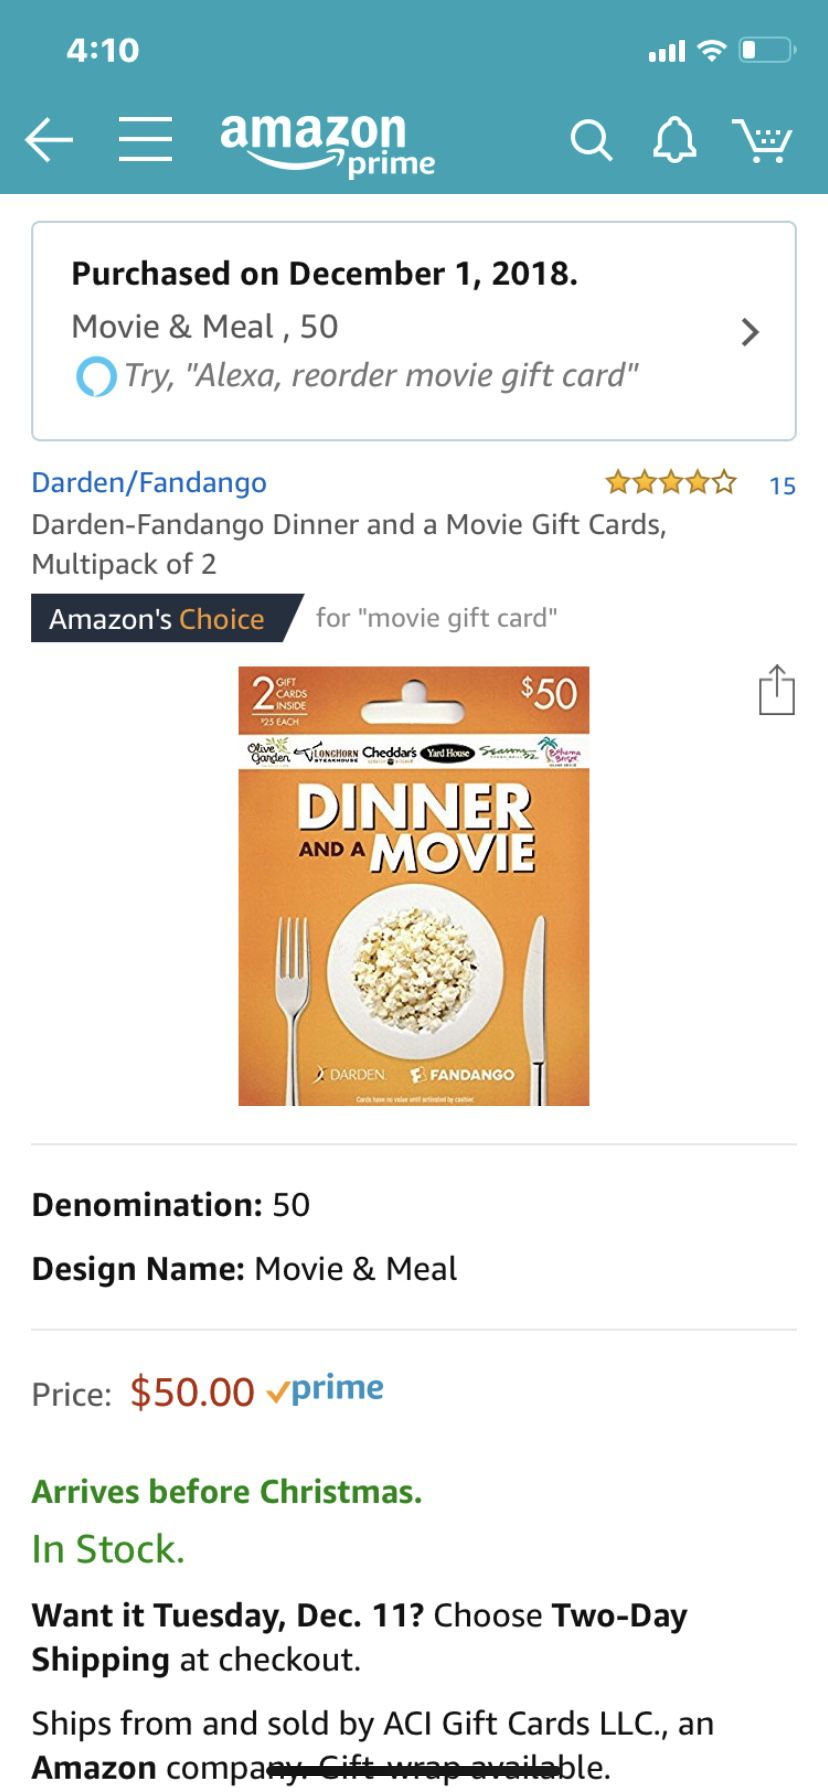 3-$50 dinner and a movie gift cards for $5 off per card. Will sell separately or together.